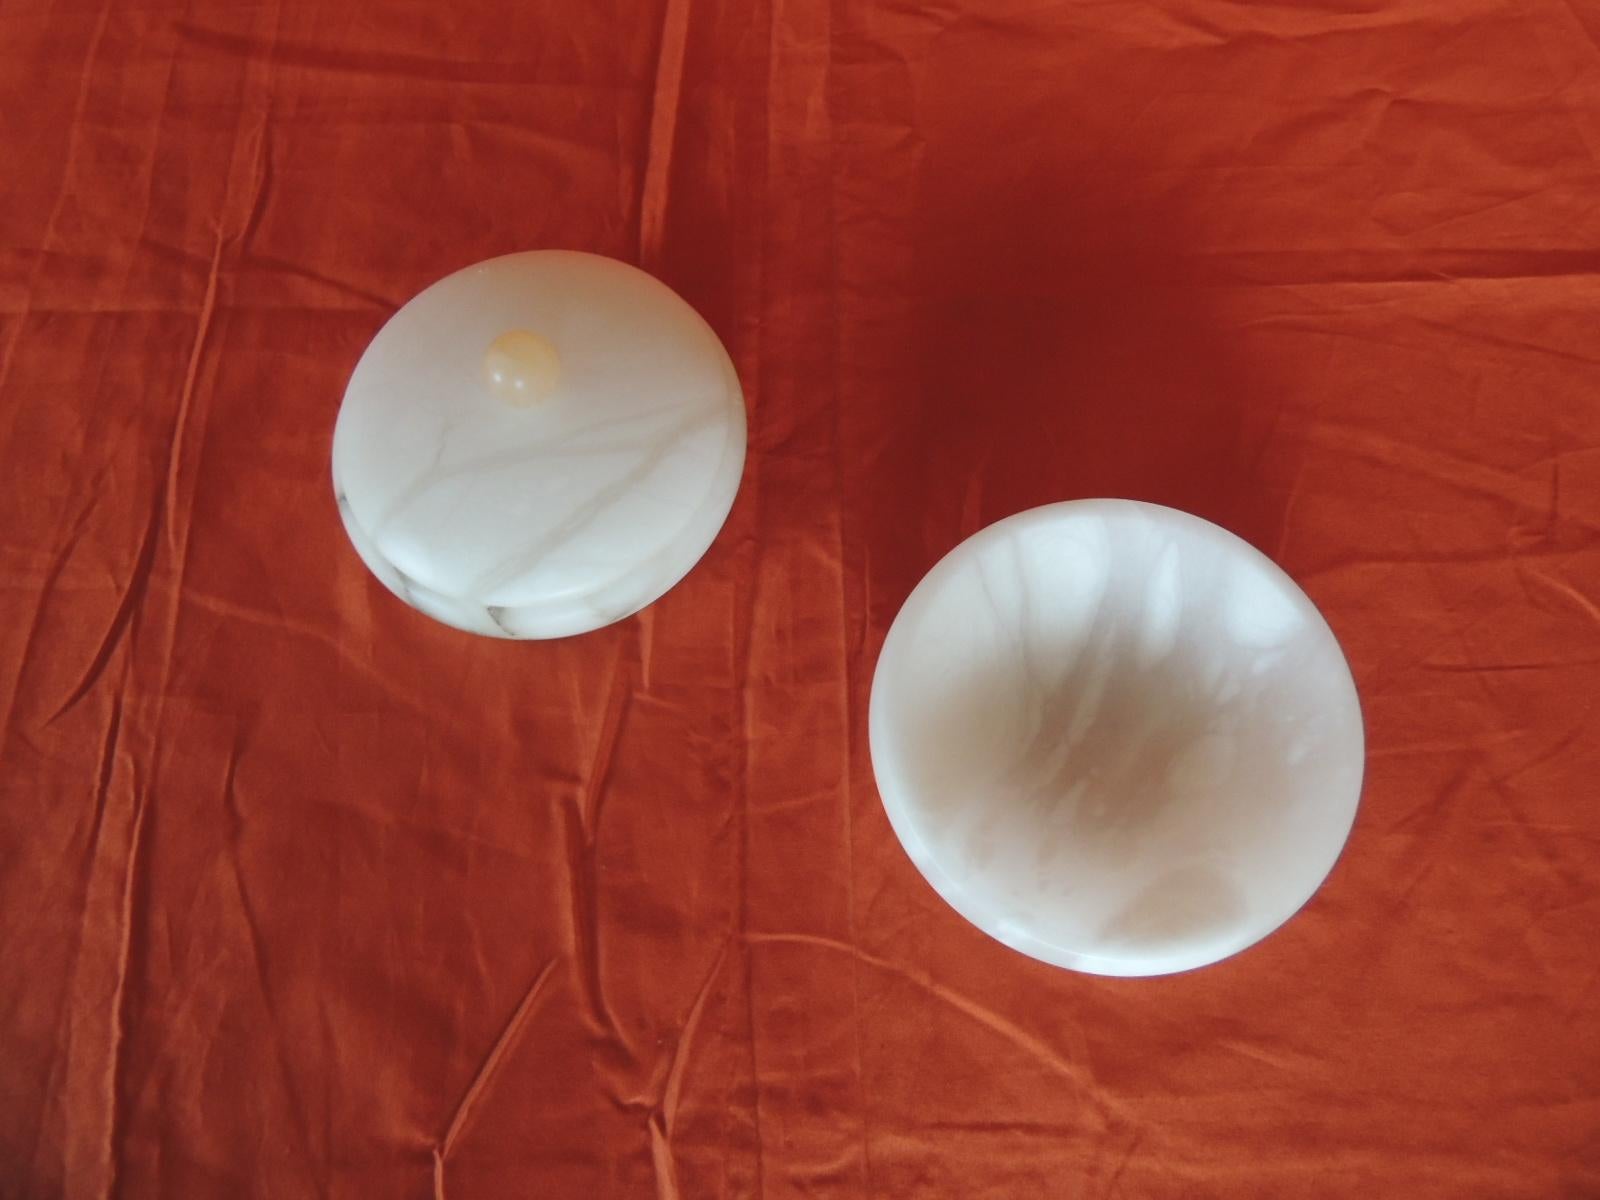 Hand carved set of covered round box and round dish Italian alabaster decorative accessories.
These pieces could be use in the bathroom or on a vanity table.
